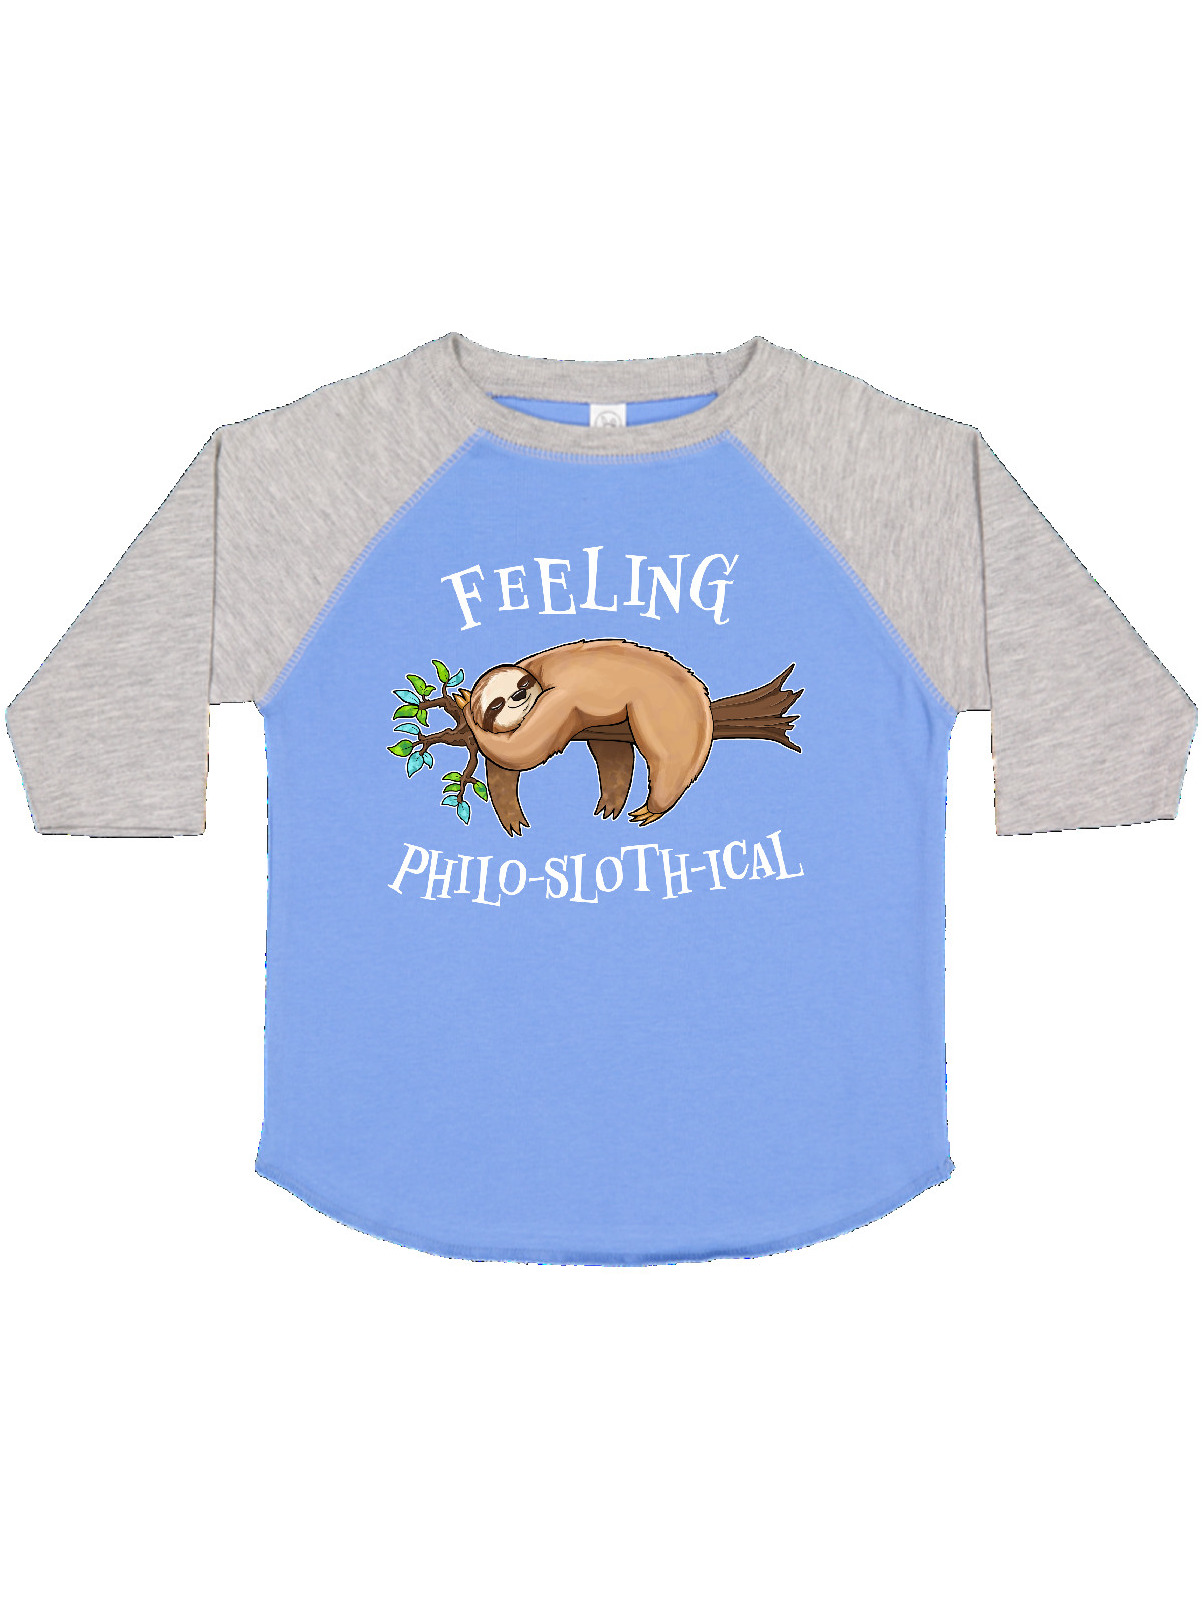 Inktastic Feeling Philo-Sloth-ical- cute and funny sloth on a tree branch Gift Toddler Boy or Toddler Girl T-Shirt - image 1 of 4